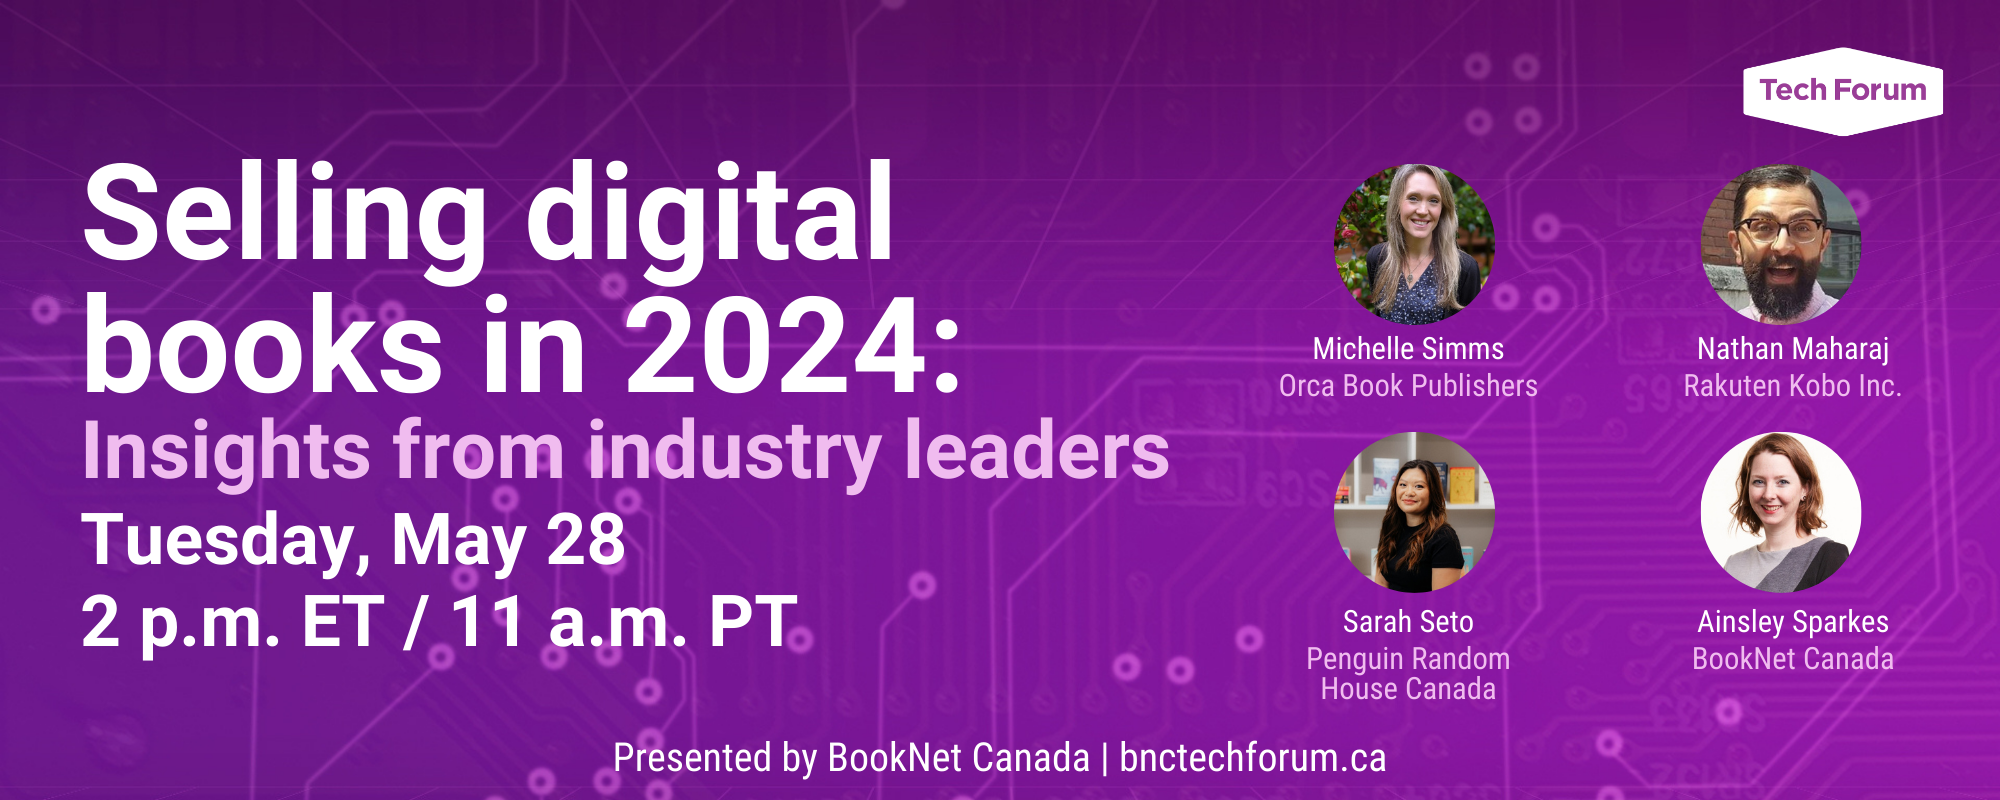 Selling digital books in 2024: Insights from industry leaders